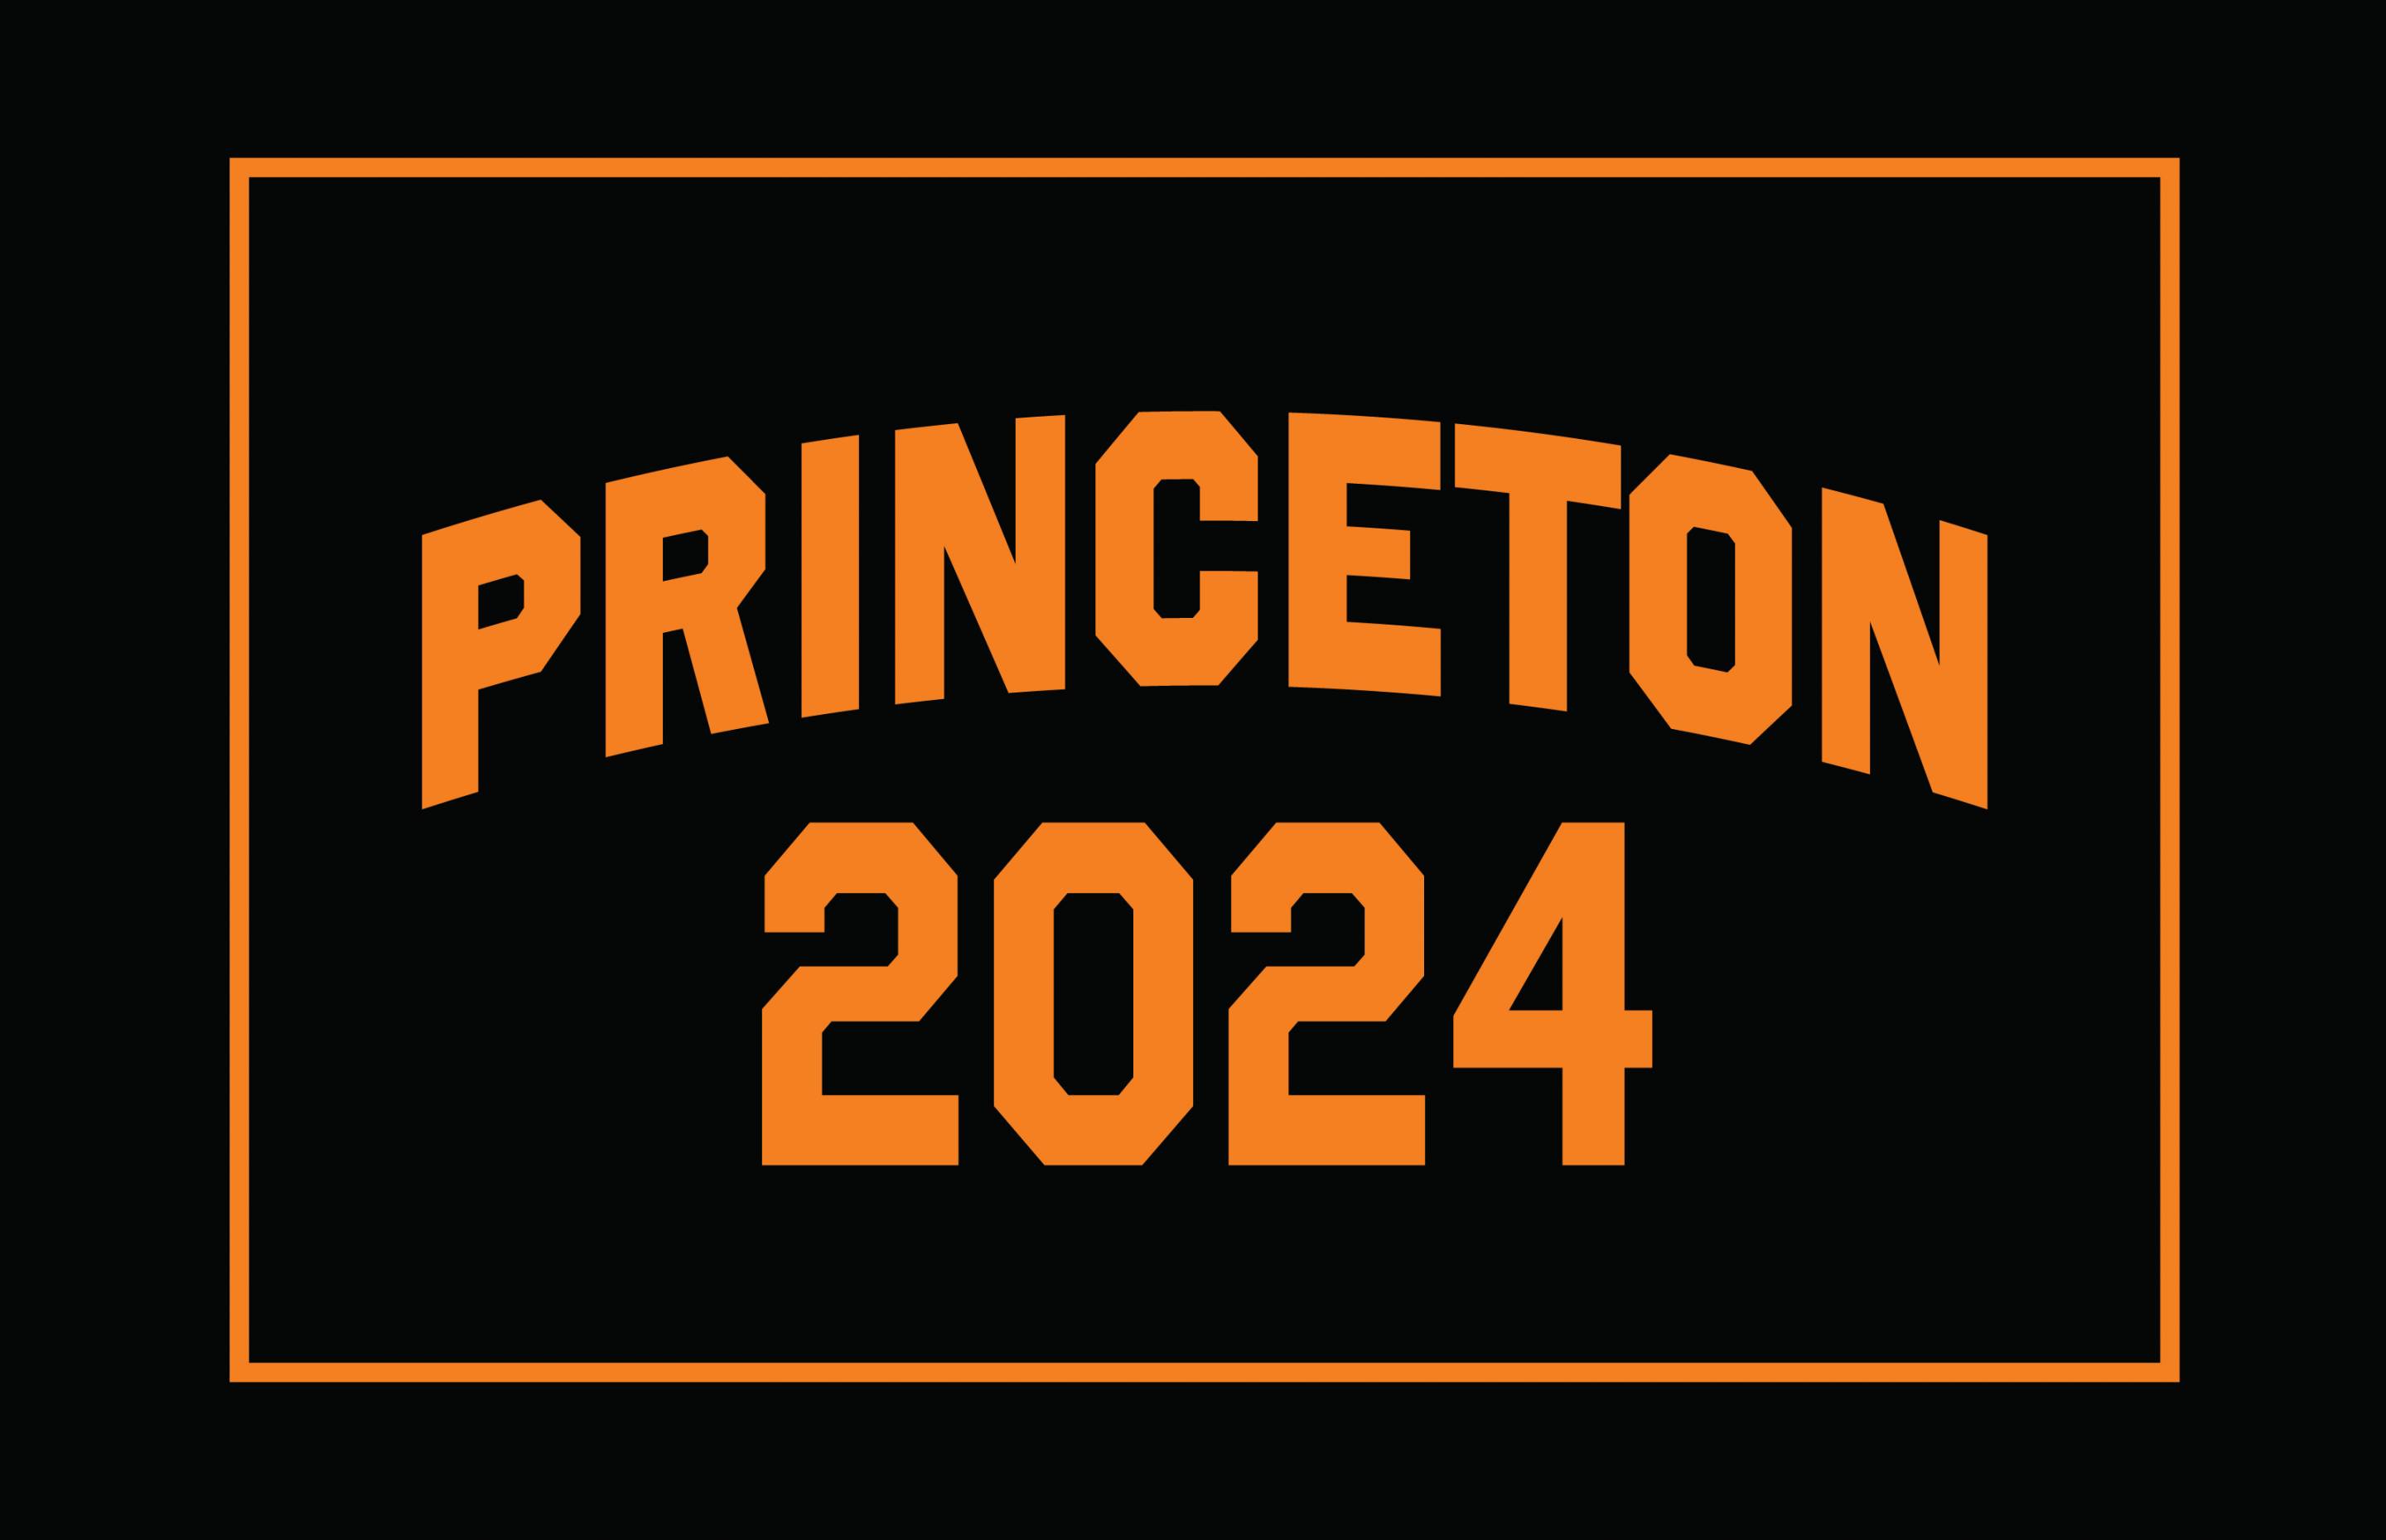 Princeton offers early action admission to 791 students for Class of 2024